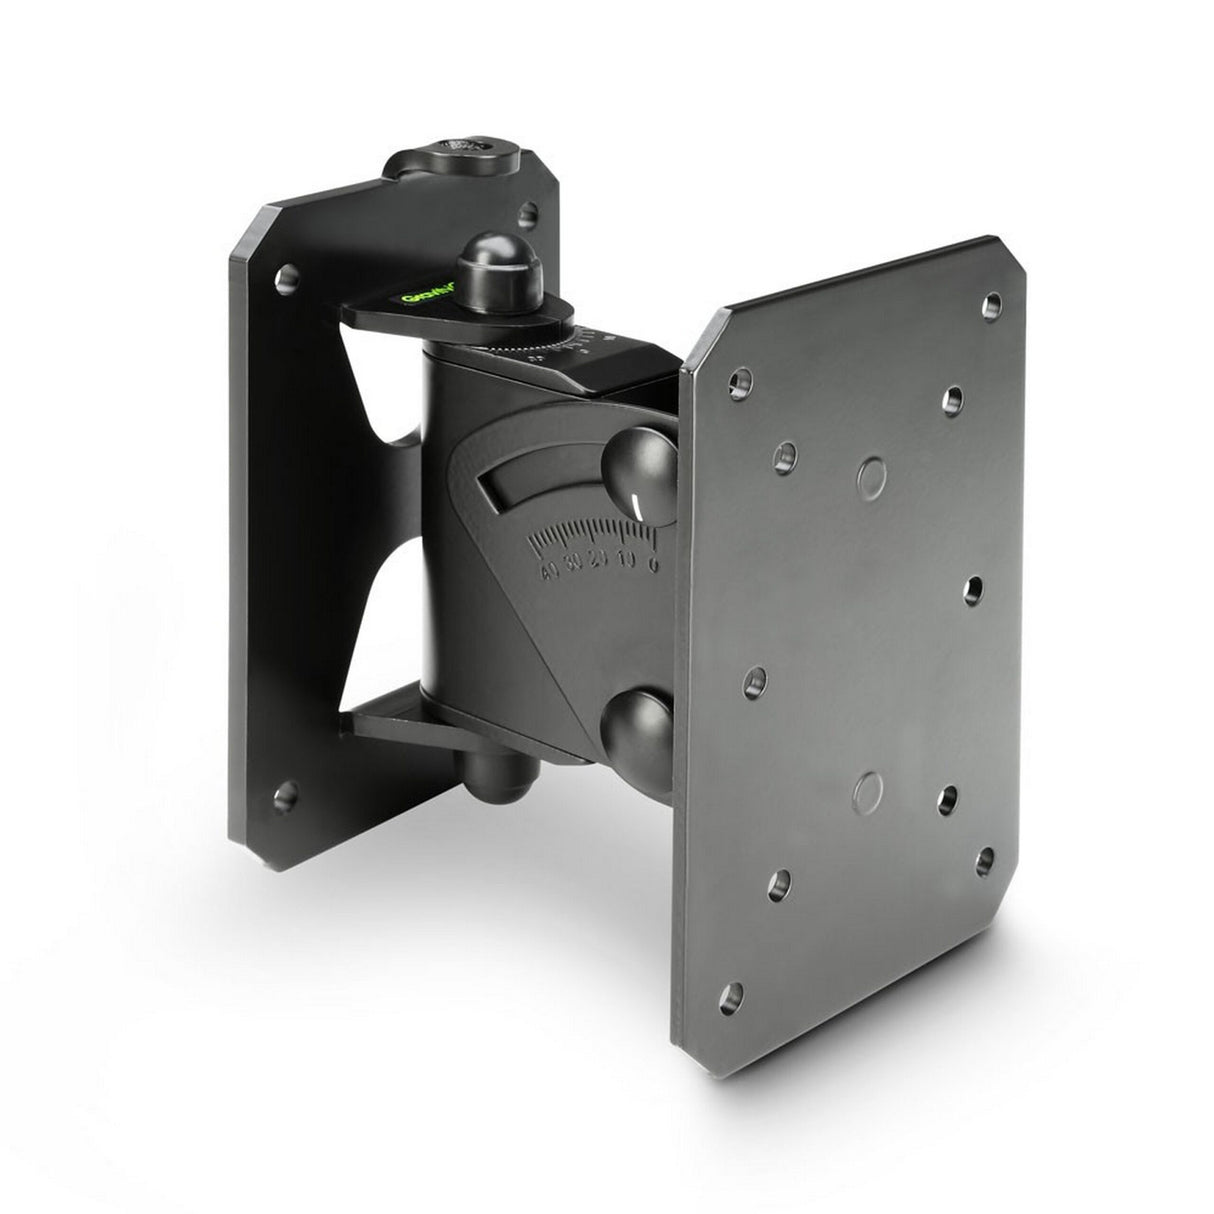 Gravity SP WMBS 20 B Tilt-and-Swivel Wall Mount for Speakers up to 20 kg